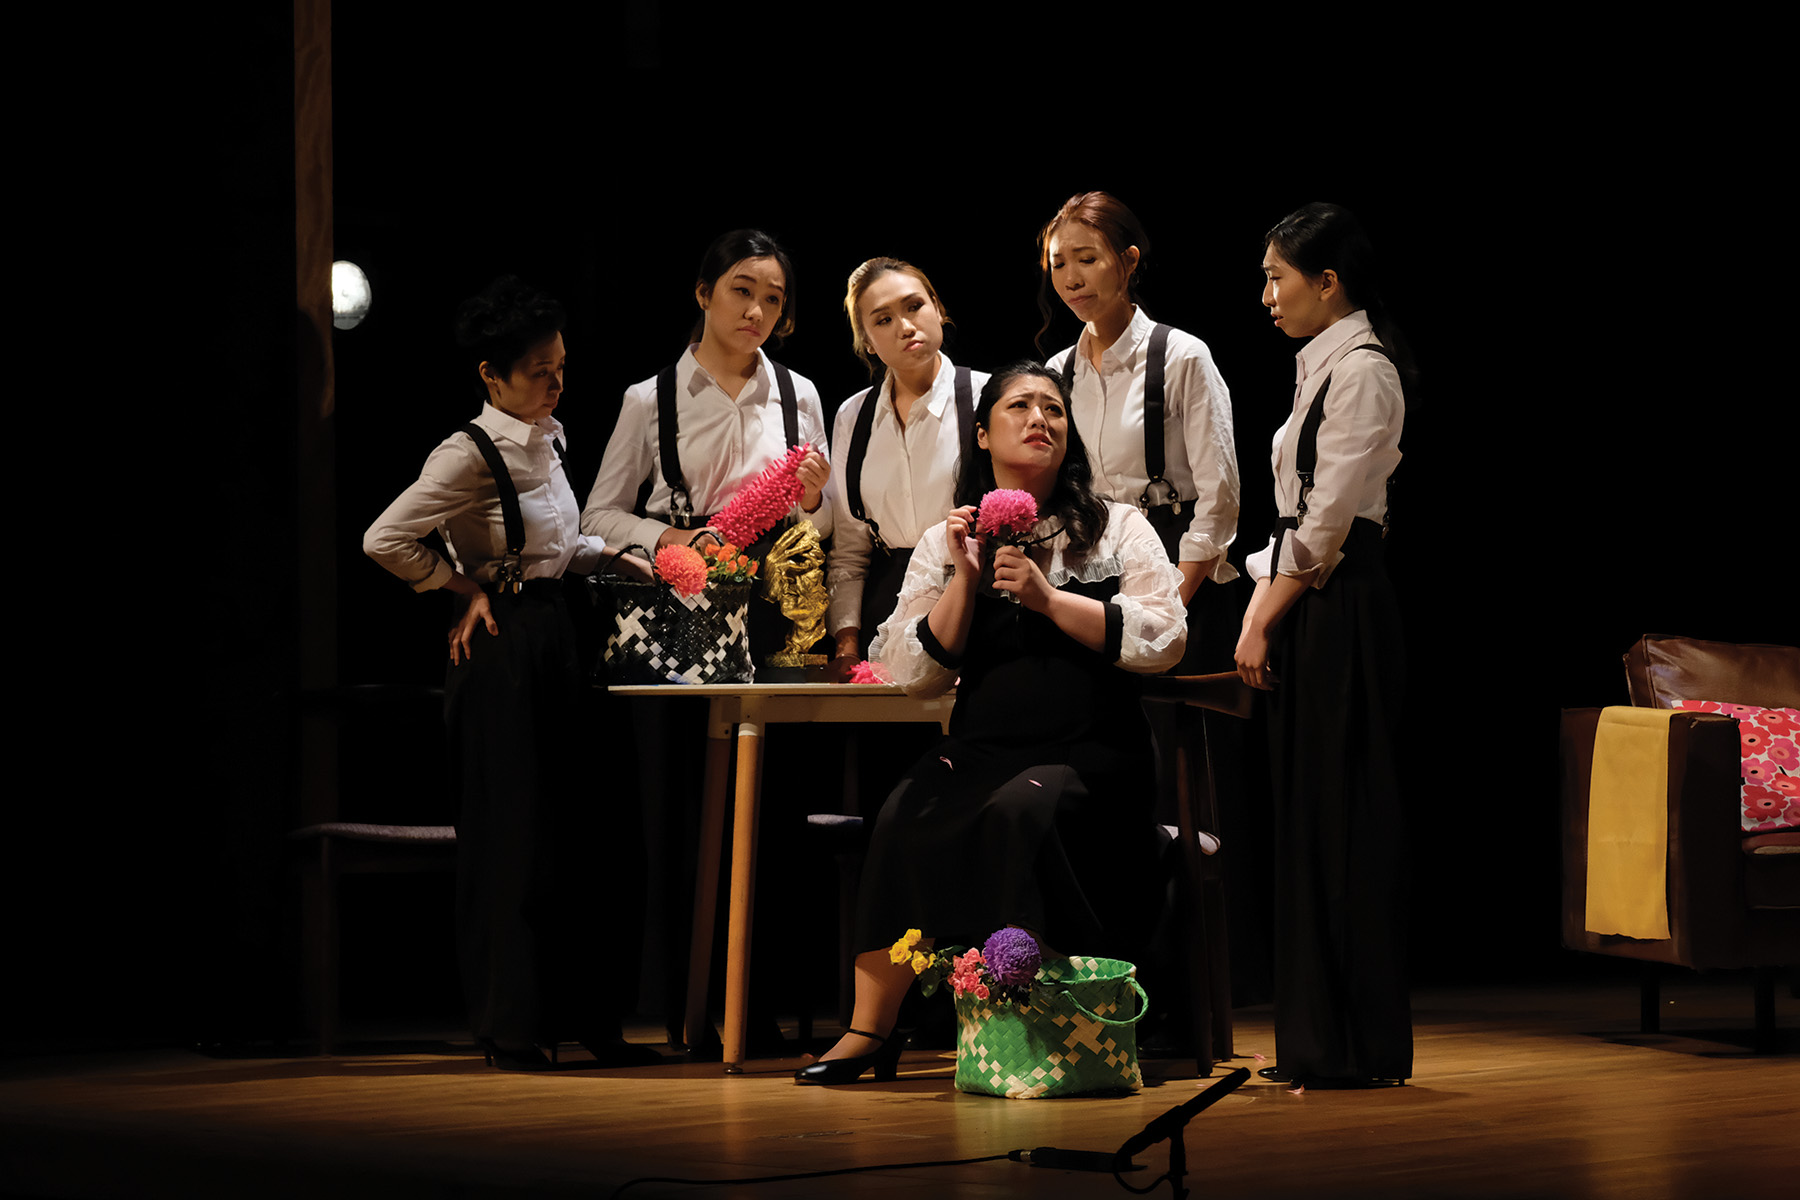 Bel Canto Singers: “My Beloved” – by Giacomo Puccini: Liù telling the girls how she misses Luigi. Photo credit: © David Quah